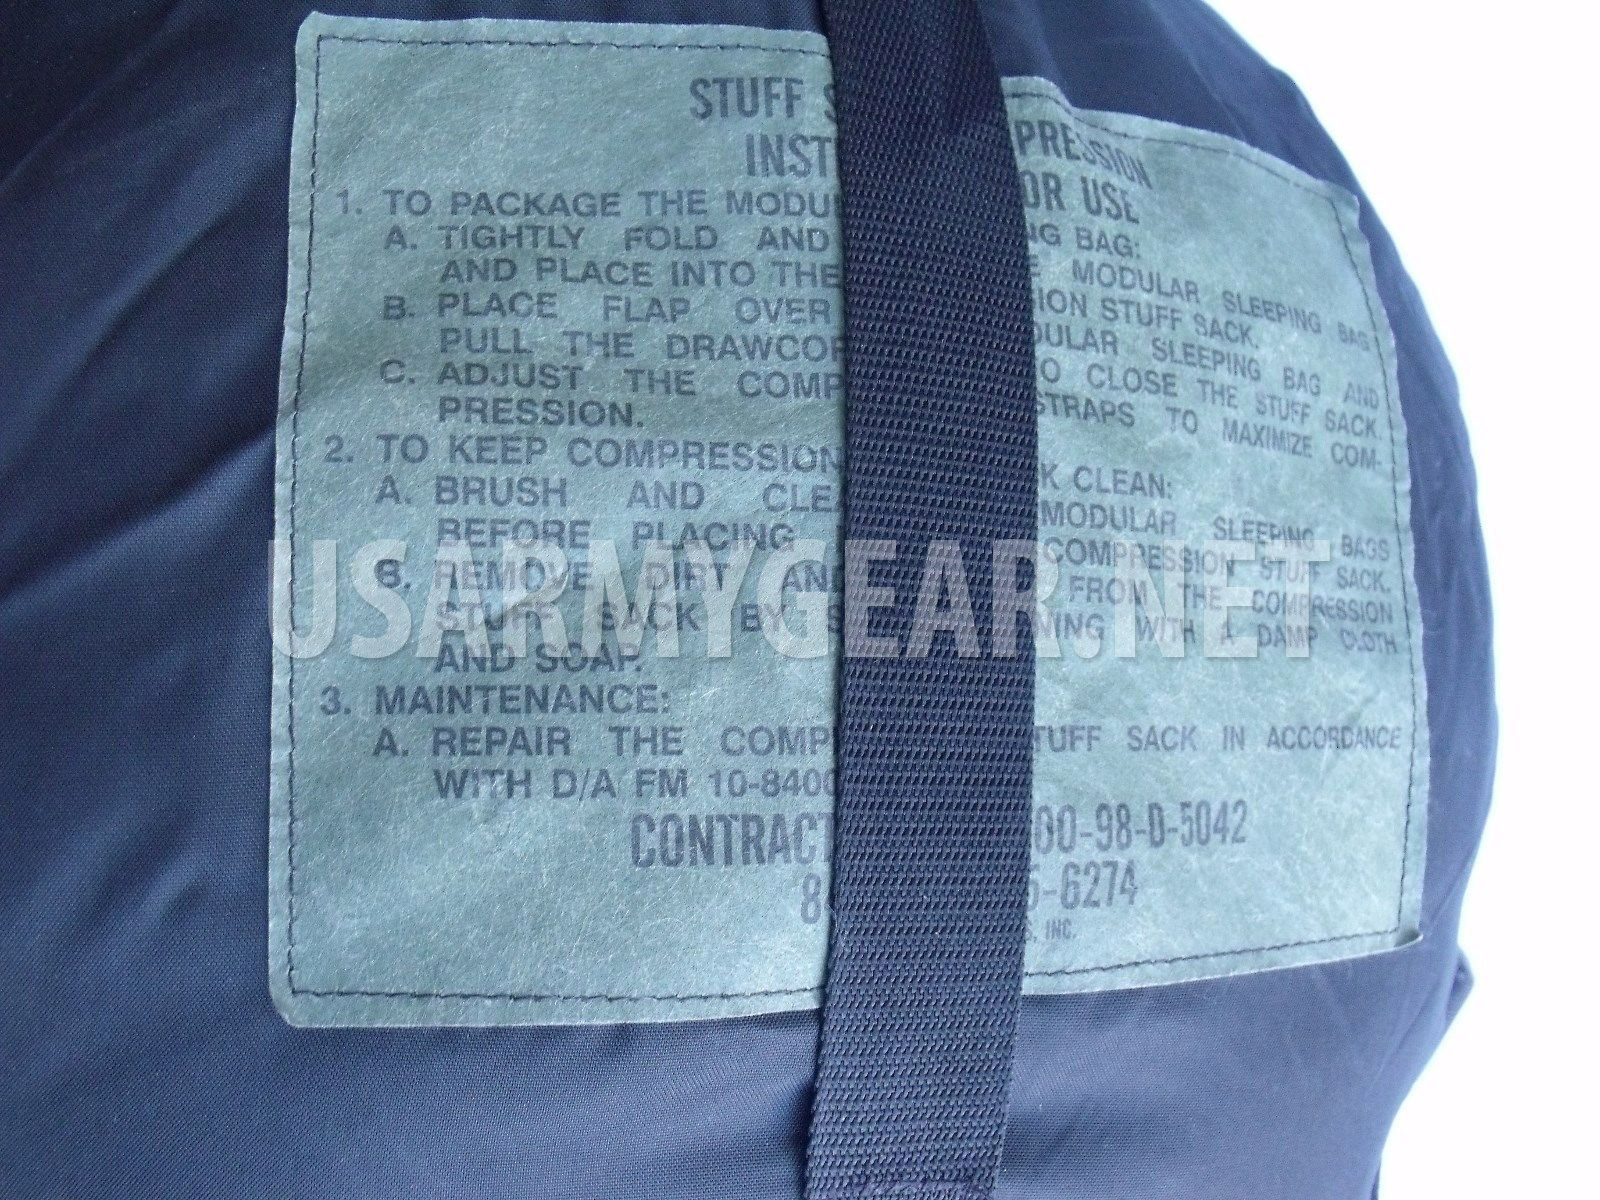 Made in USA Army Military Sleeping Bag Compression Stuff Sack Bag Pack Camping